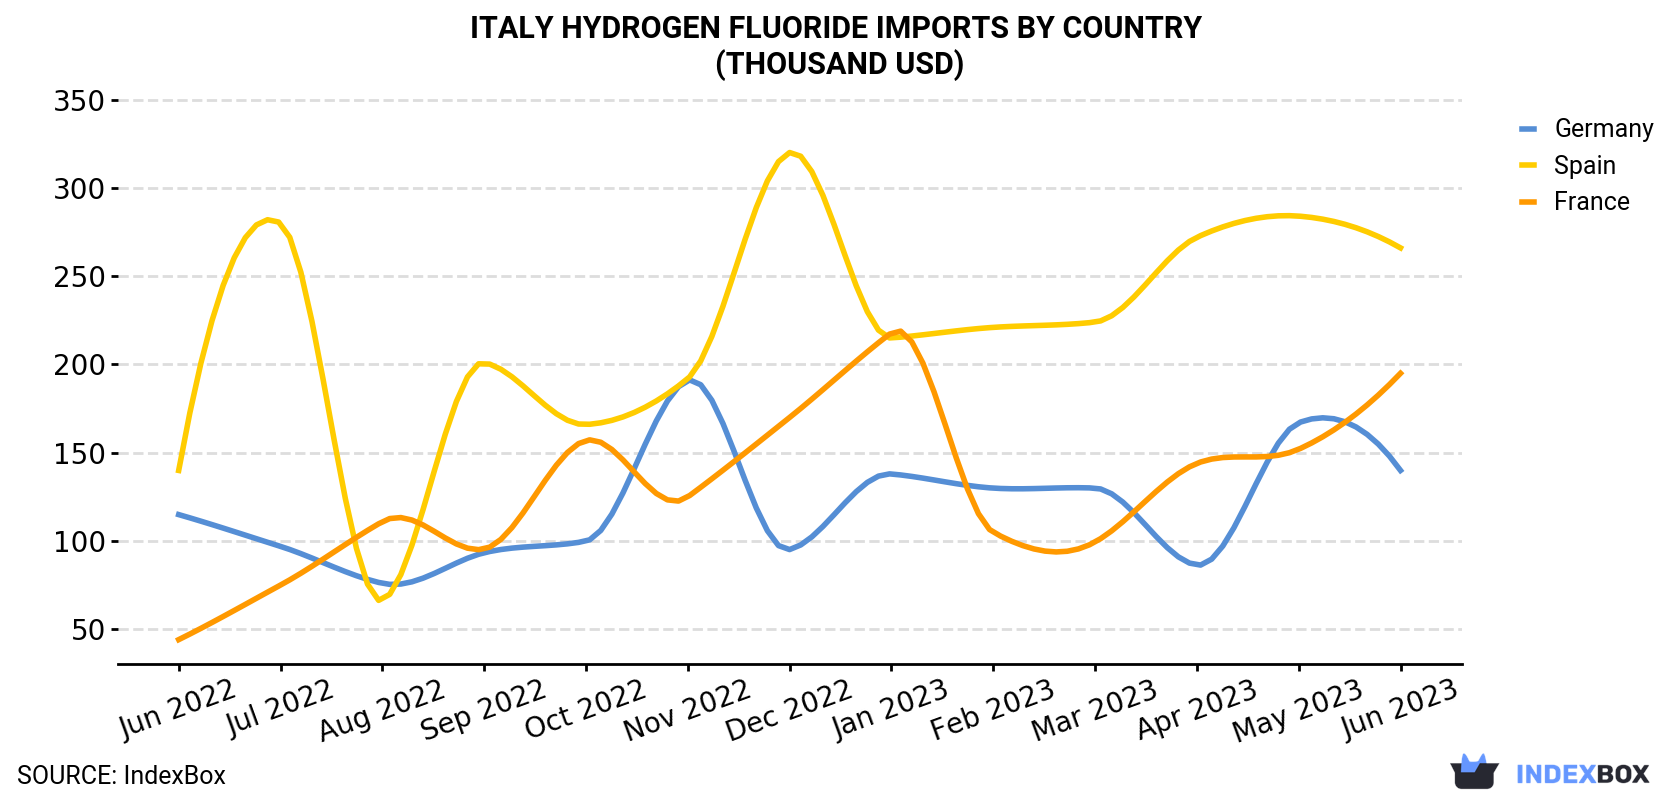 Italy Hydrogen Fluoride Imports By Country (Thousand USD)